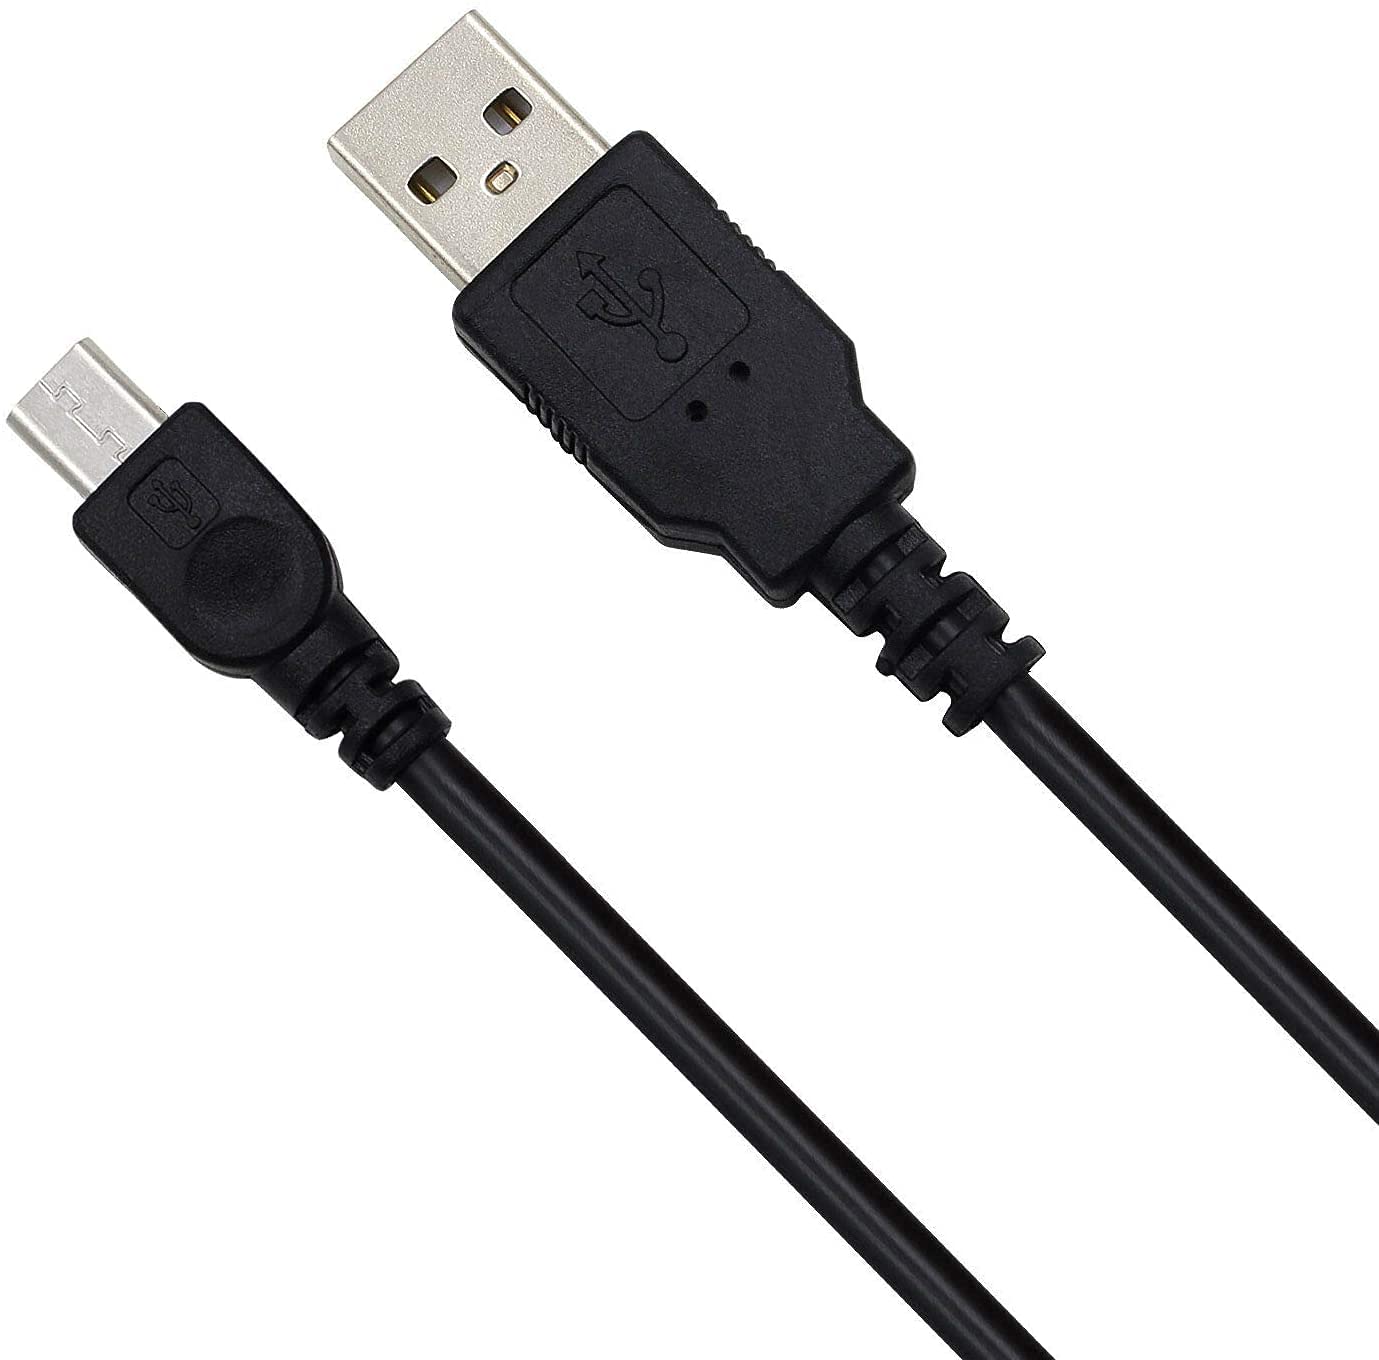 BestCH Micro-USB to USB Charging Cable Cord Lead for Vupoint Solutions Magic Wand Portable Scanner